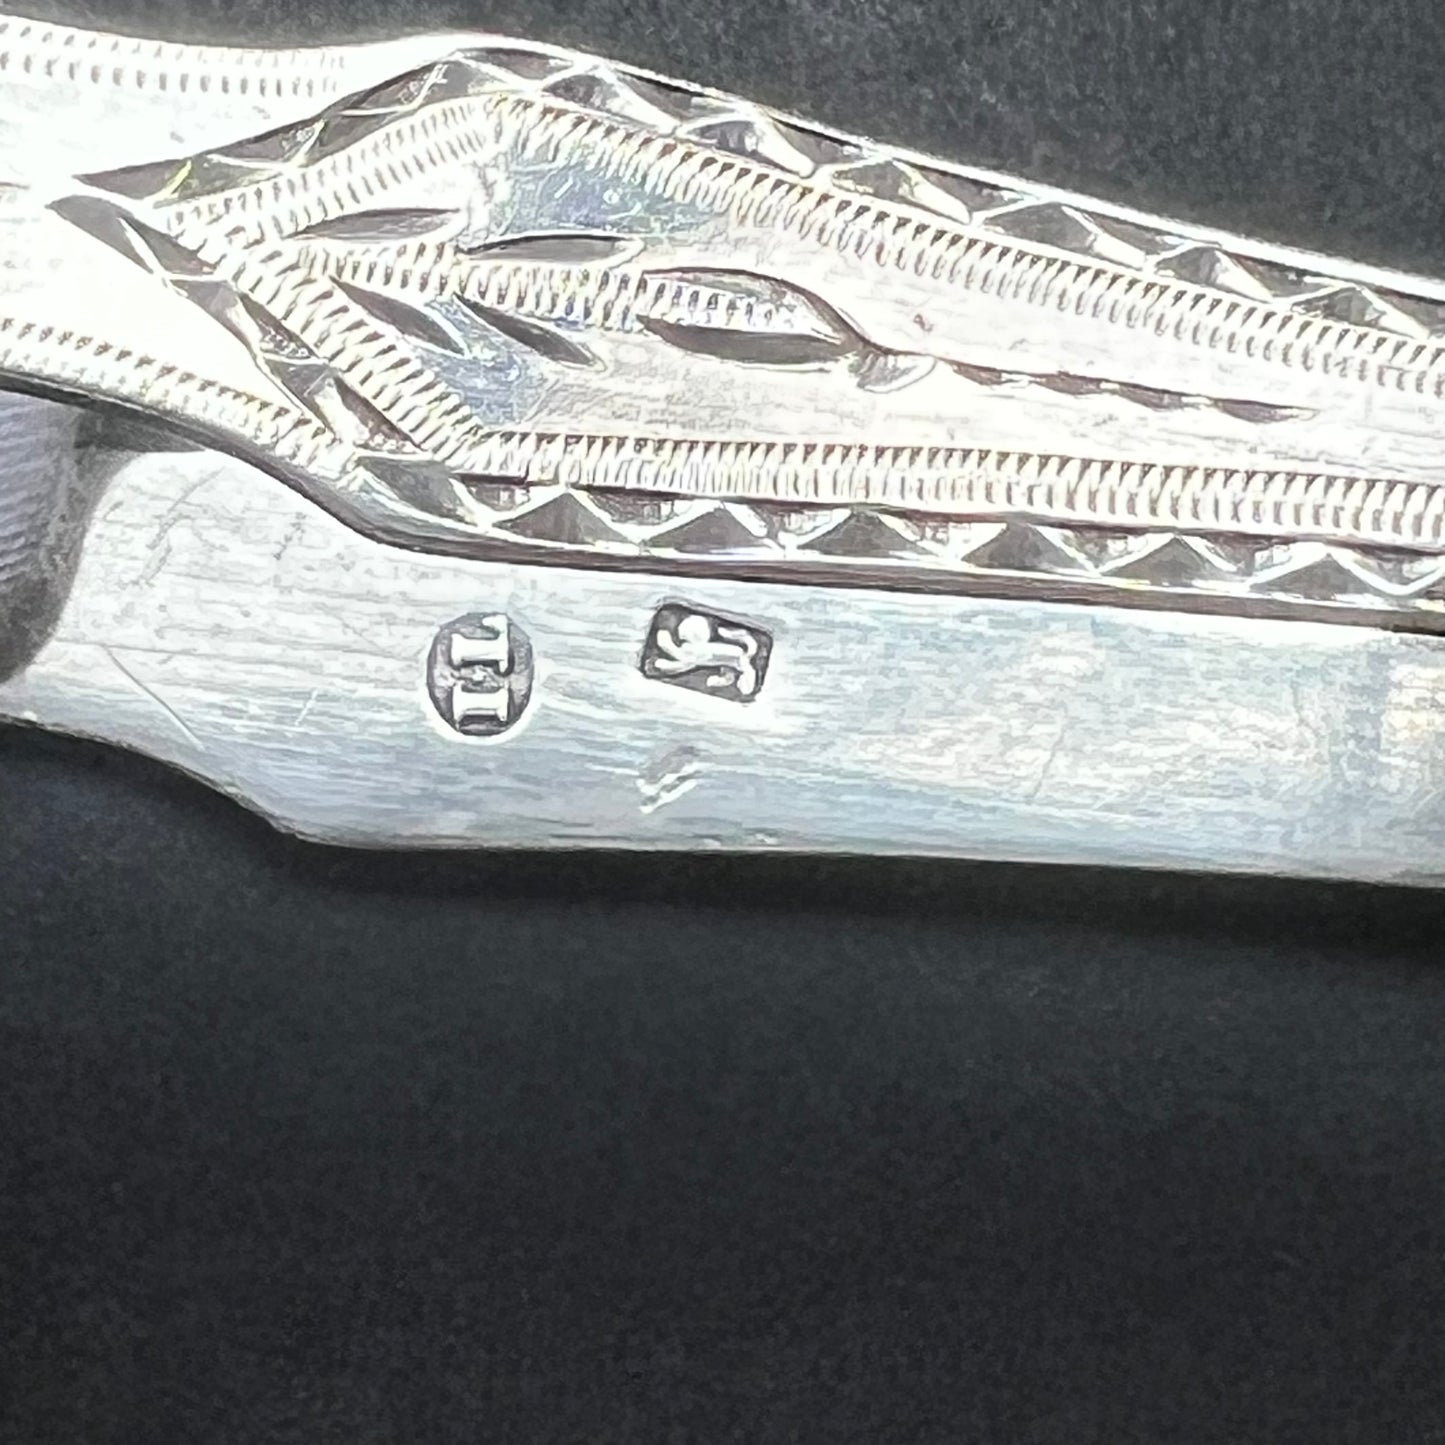 Late Georgian to Regency English provincial sterling silver tongs with thick gauge and crisp hallmarks. John Langlands II, Newcastle, 1796 to 1802